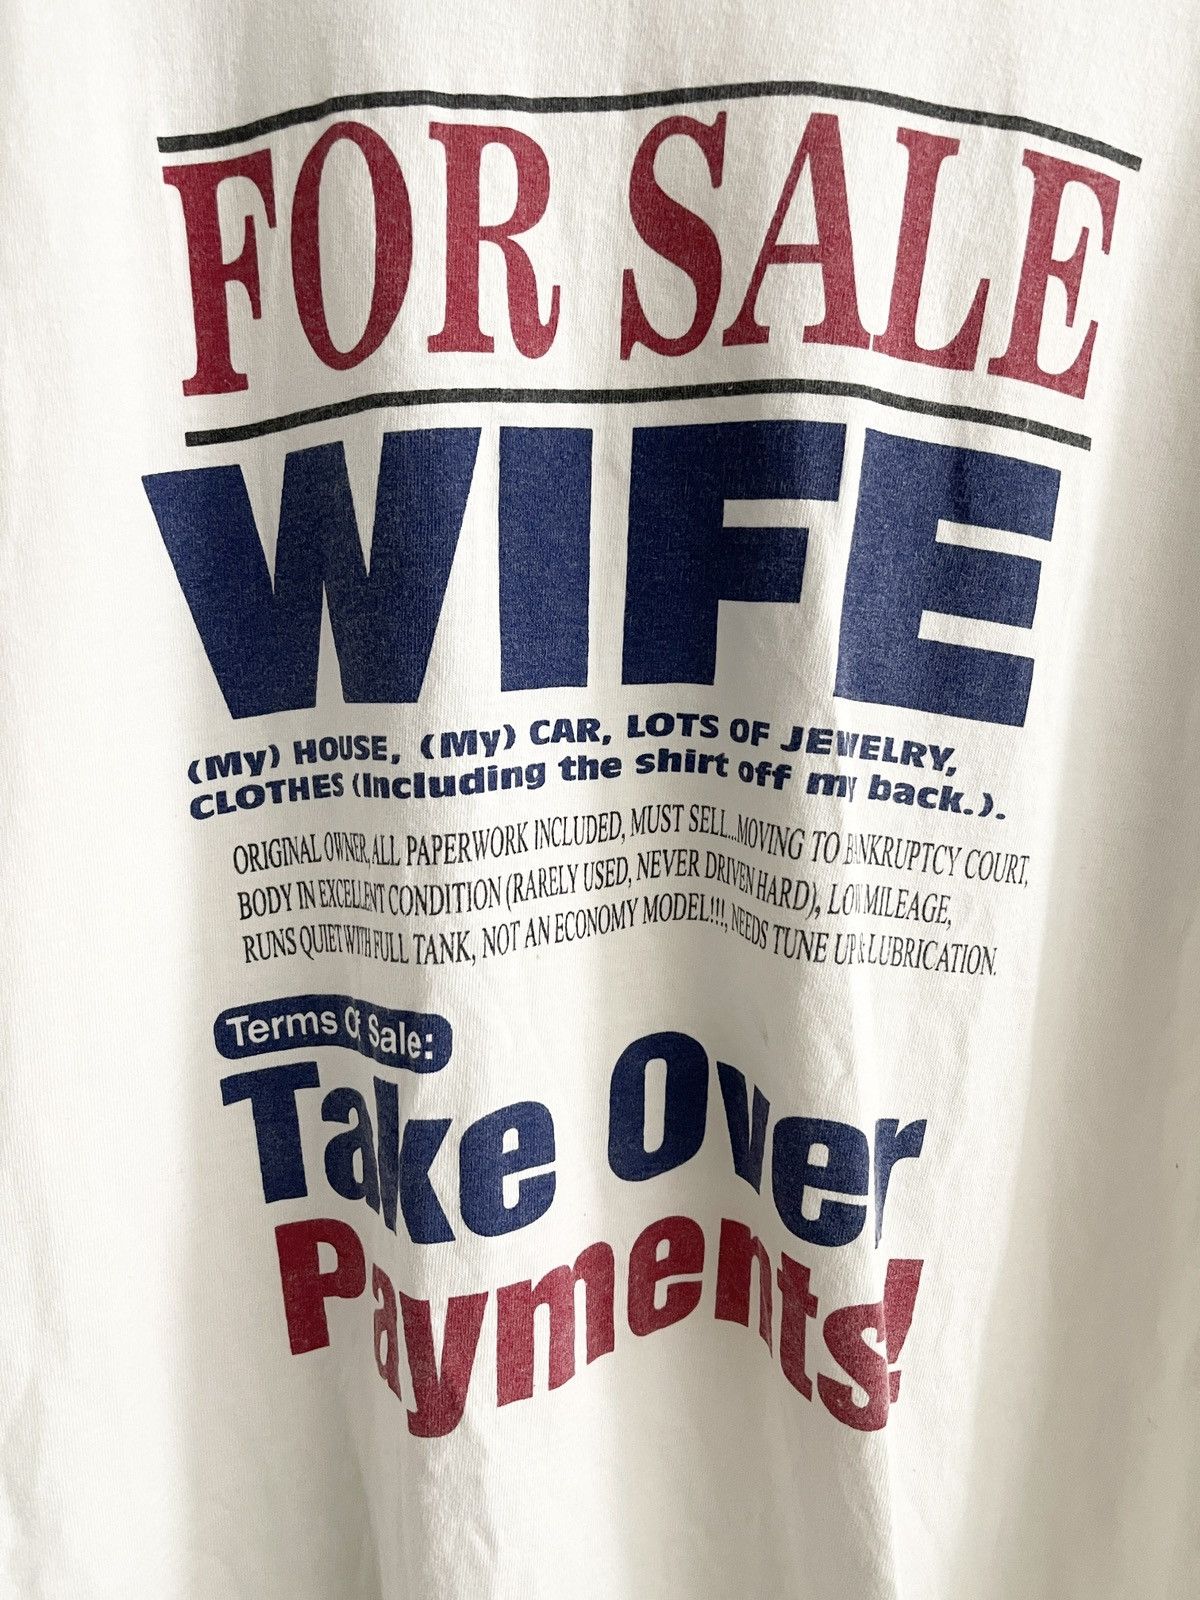 Steal! Vintage 2000 Wife For Sale Tee - 4